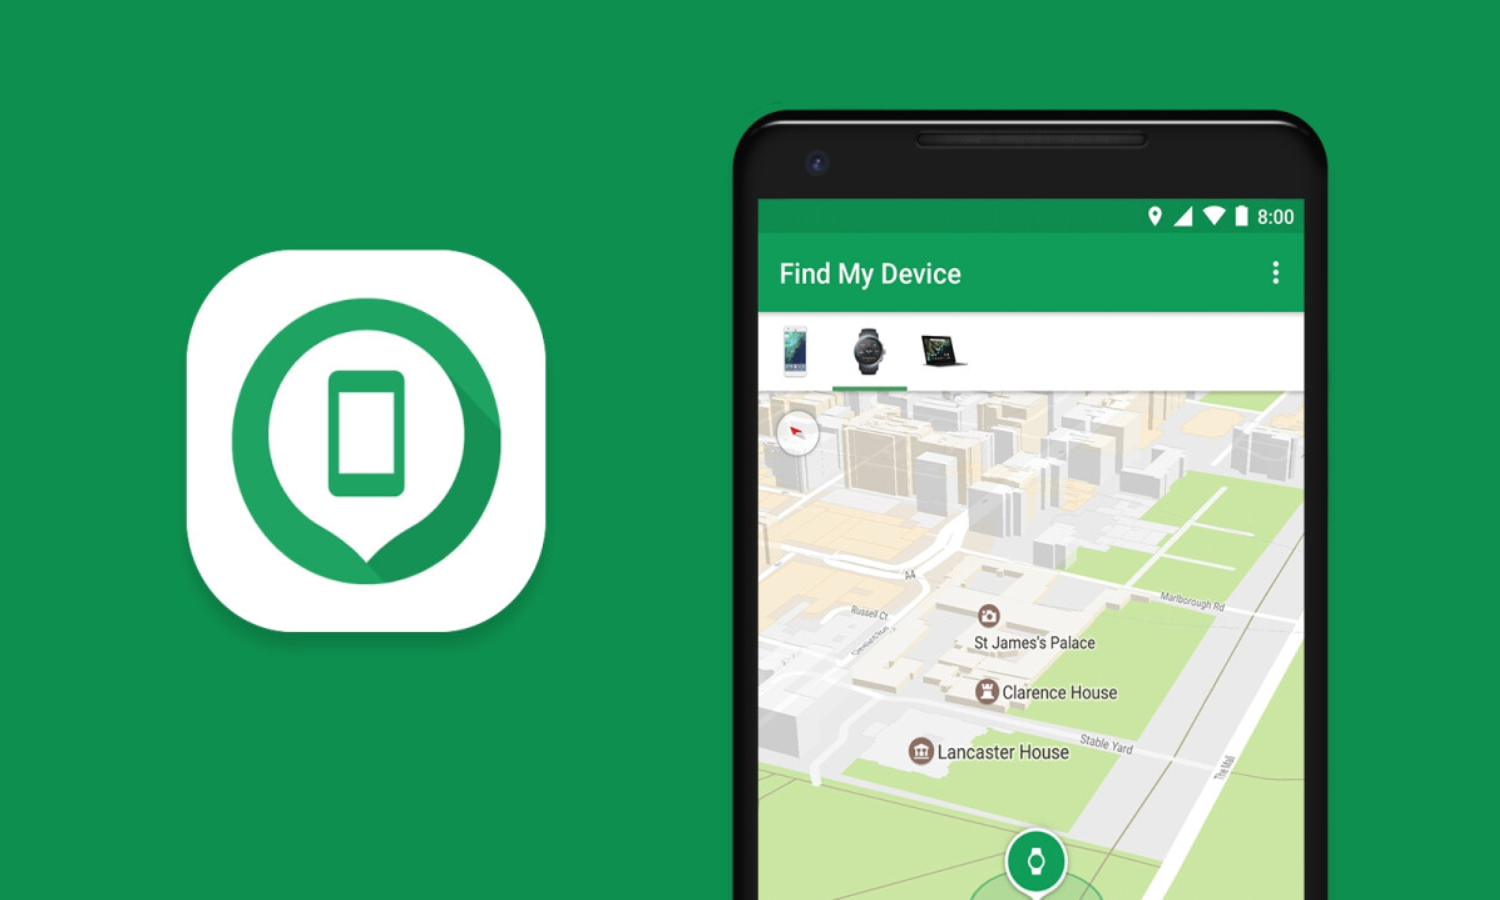 How to find phone location using Find my device app